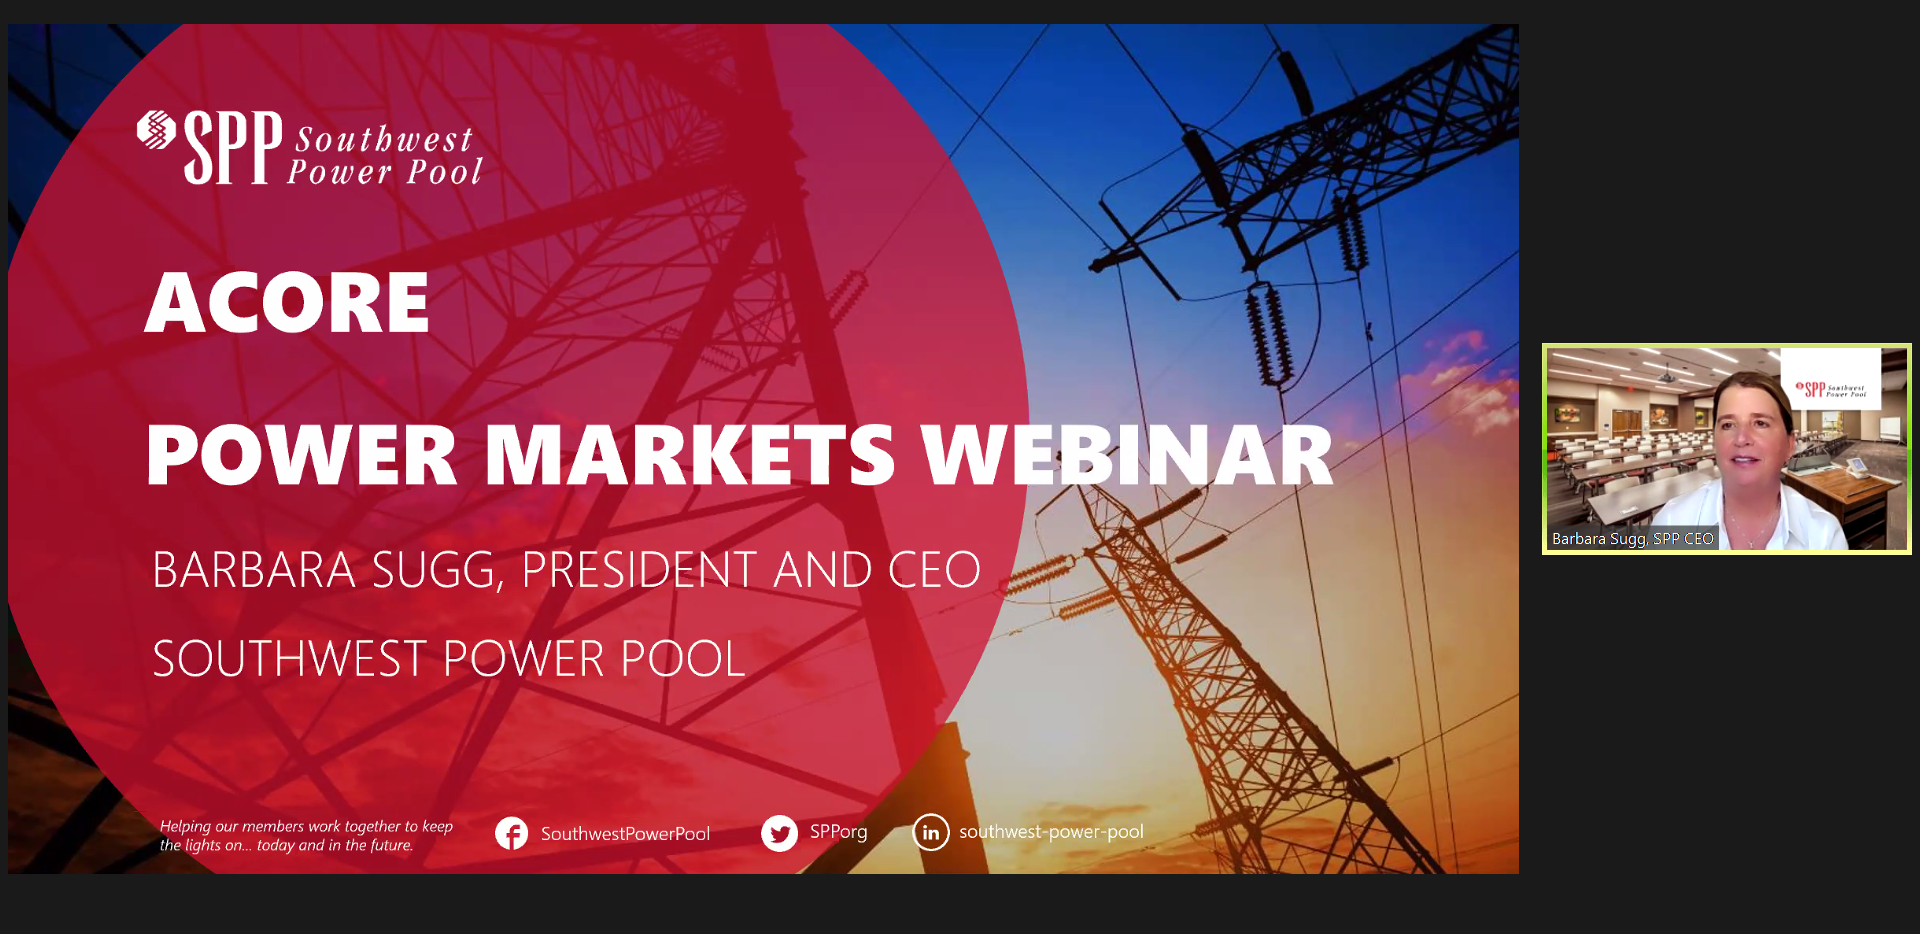 Title screen of ACORE Power Markets Webinar with SPP President and CEO Barbara Sugg